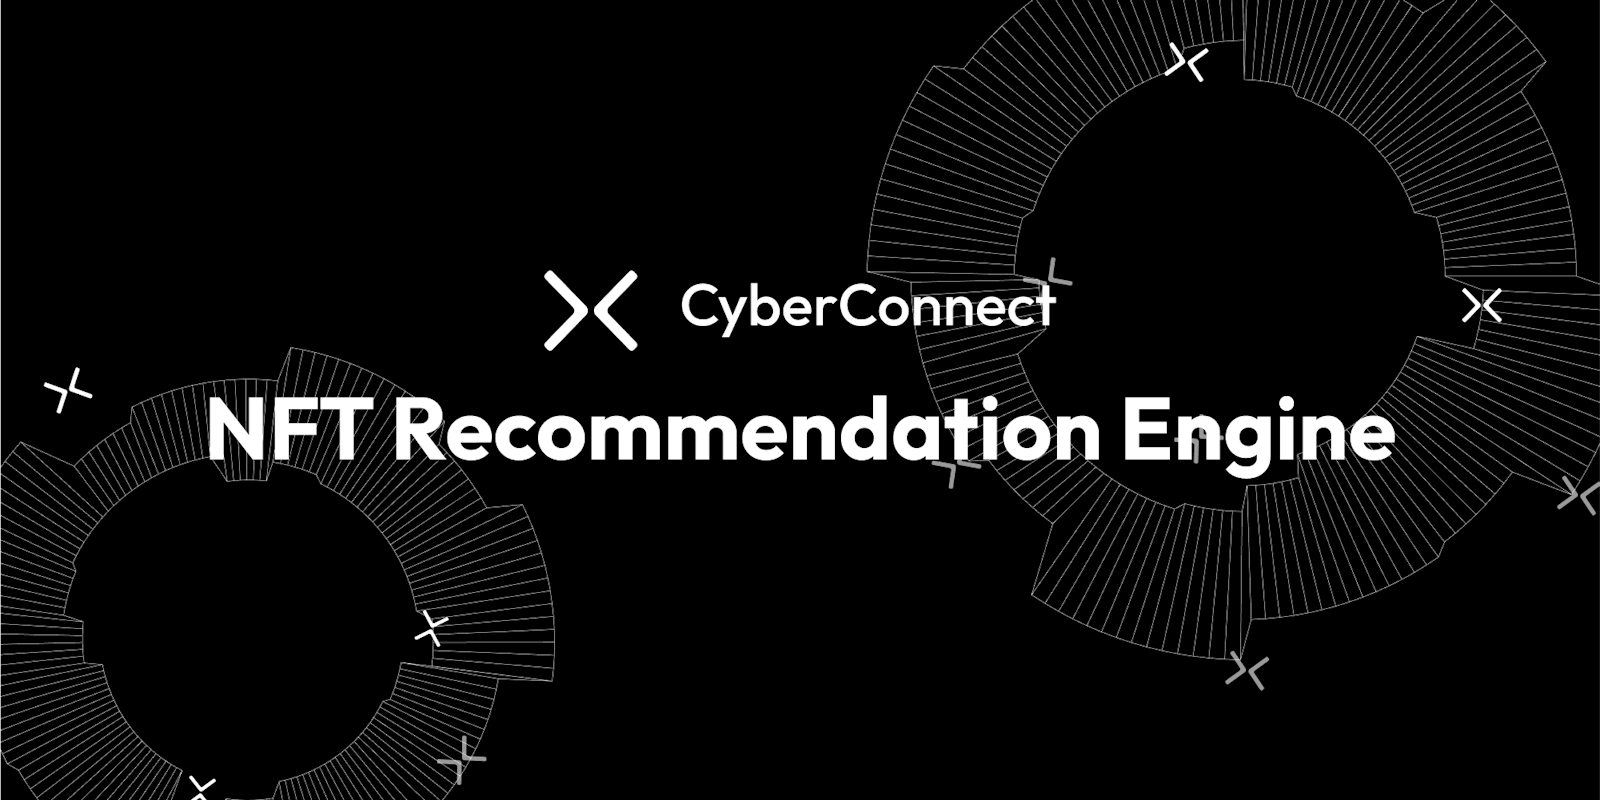 CyberConnect's NFT Recommendation Engine